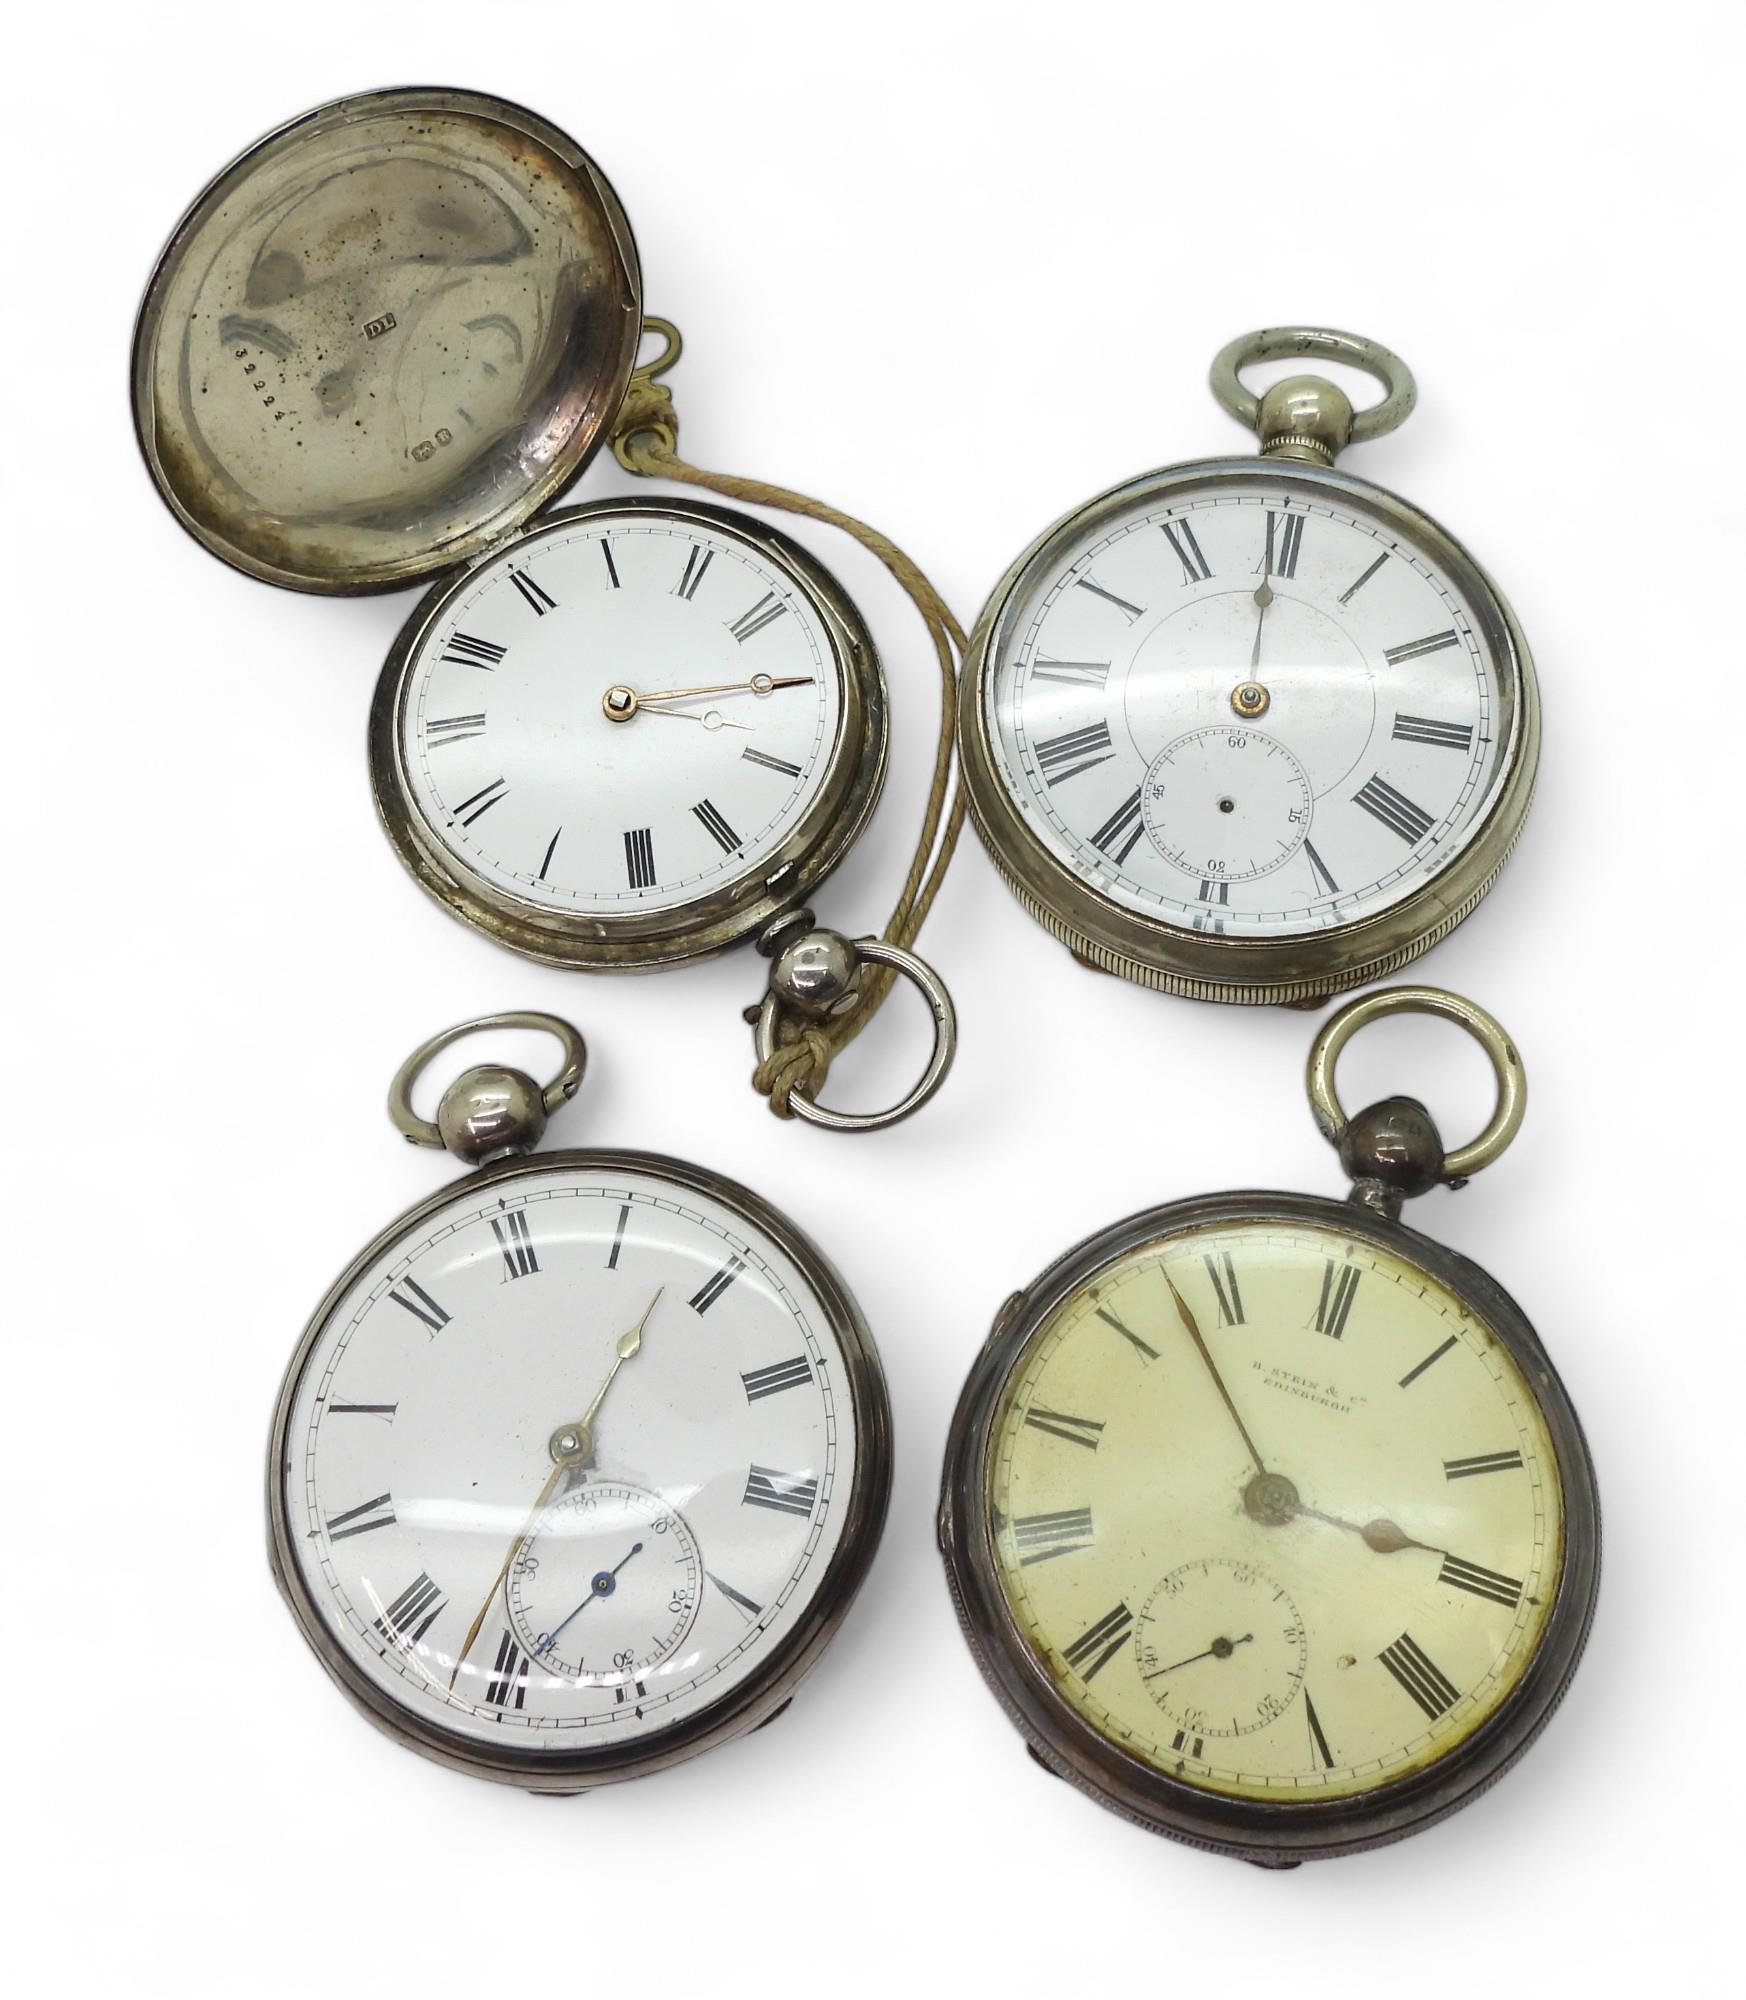 Three silver pocket watches, two with diamond end caps, dated 1835 and 1852, a further example dated